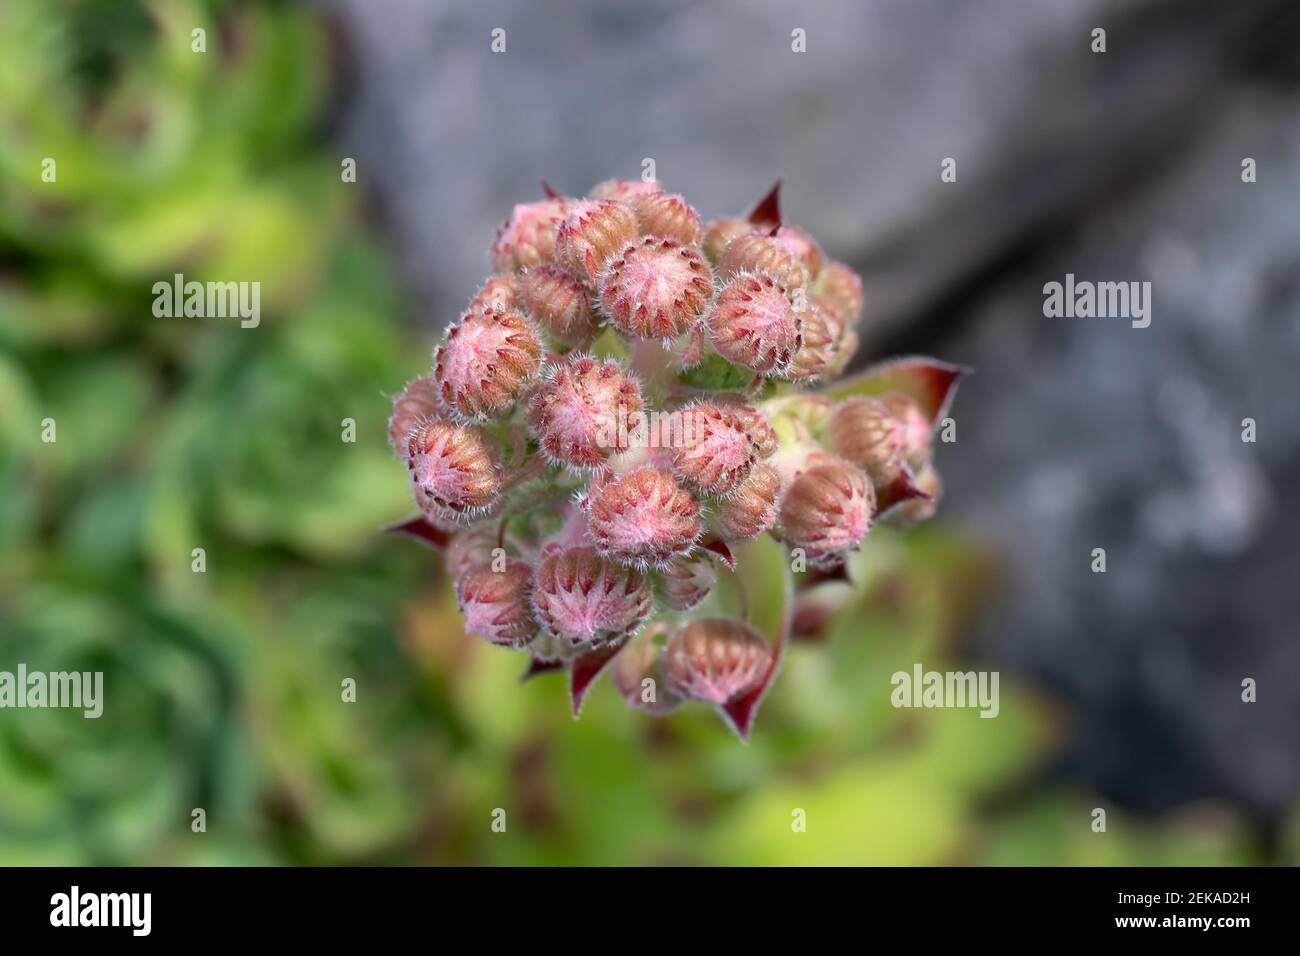 Blooming of an evergreen groundcover plant Sempervivum known as Houseleek in rockery. Stock Photo